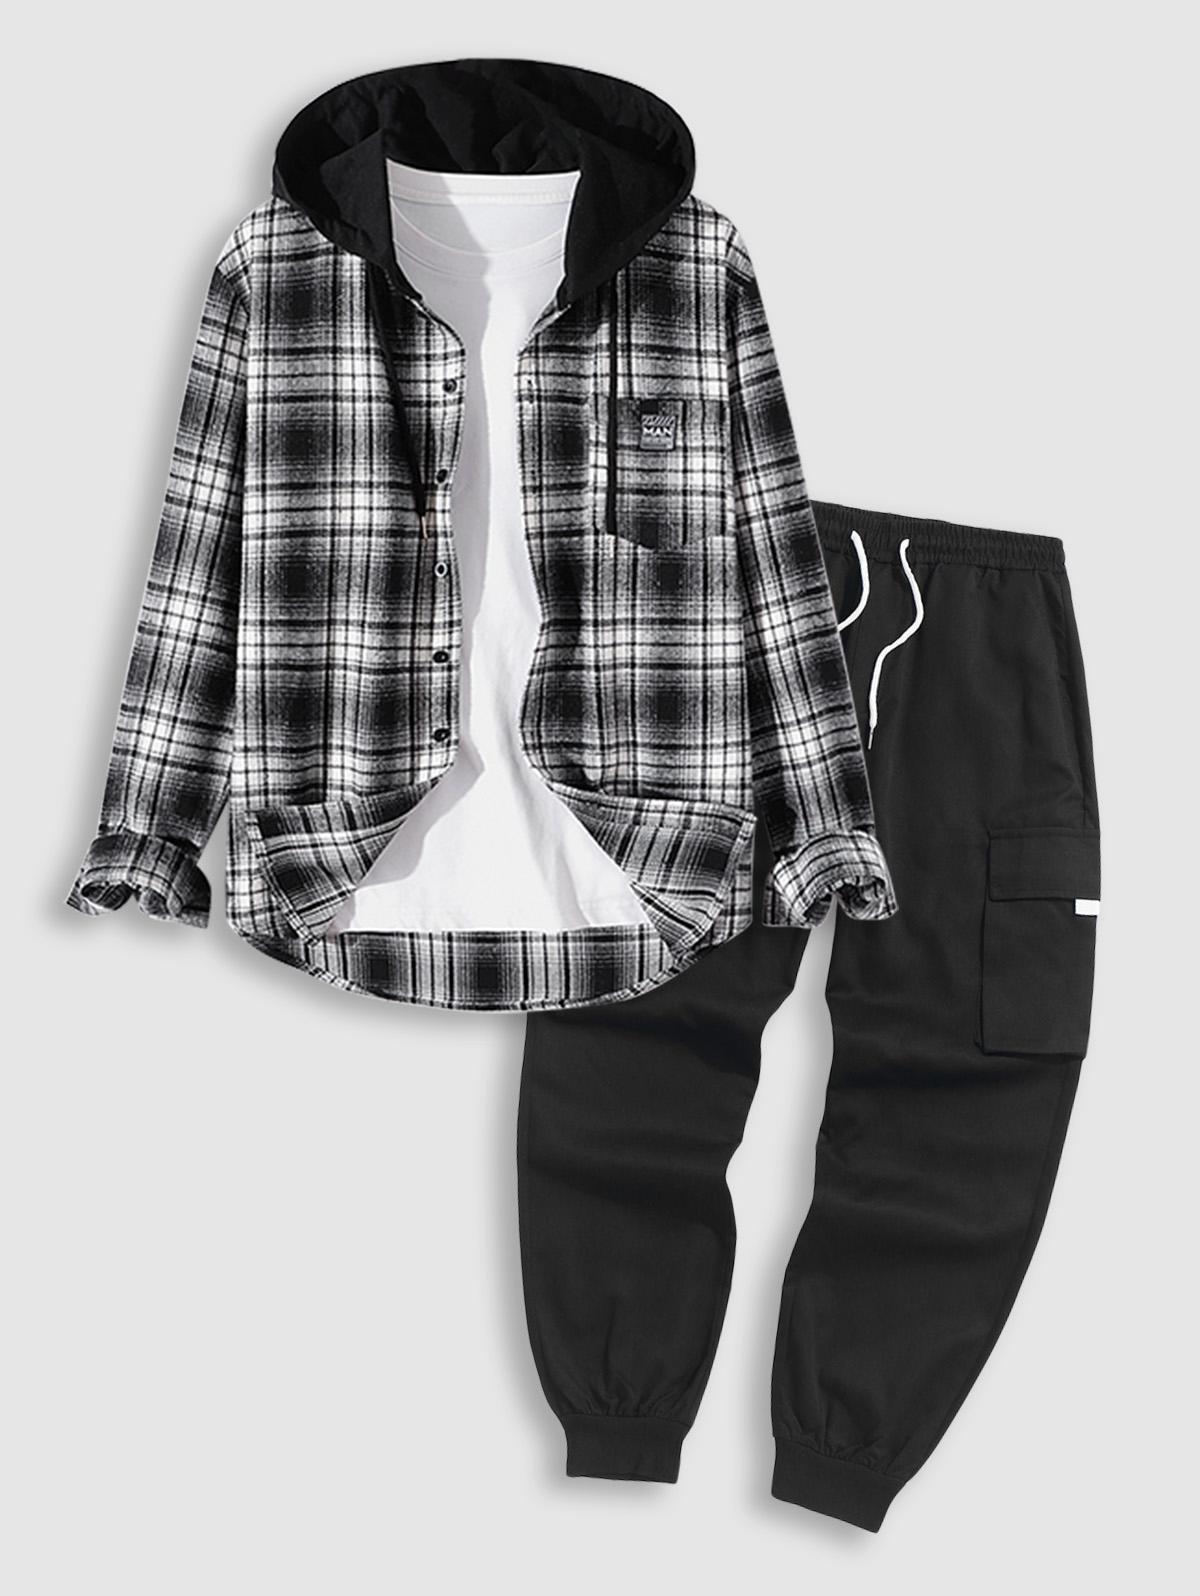 ZAFUL Men's Flannel Plaid Hooded Shirt With Techwear Cargo Pants Two Piece Set Black